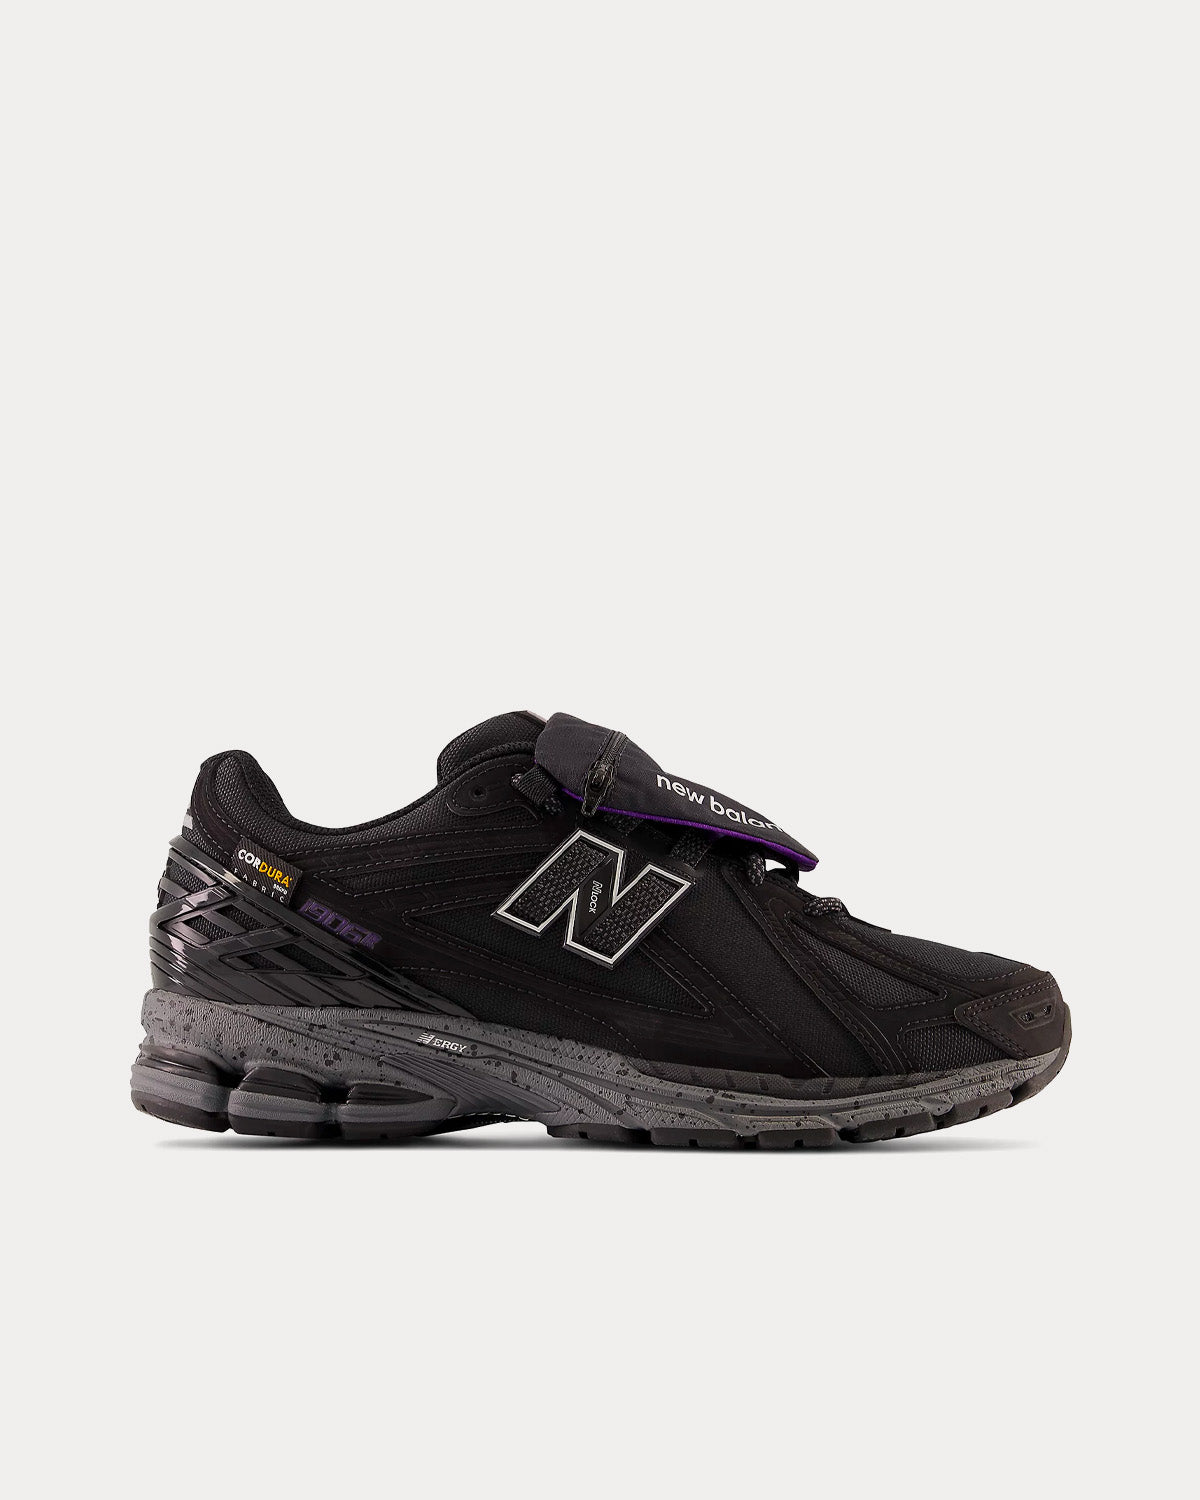 New Balance 1906R Black with Prism Purple and Castlerock Low Top